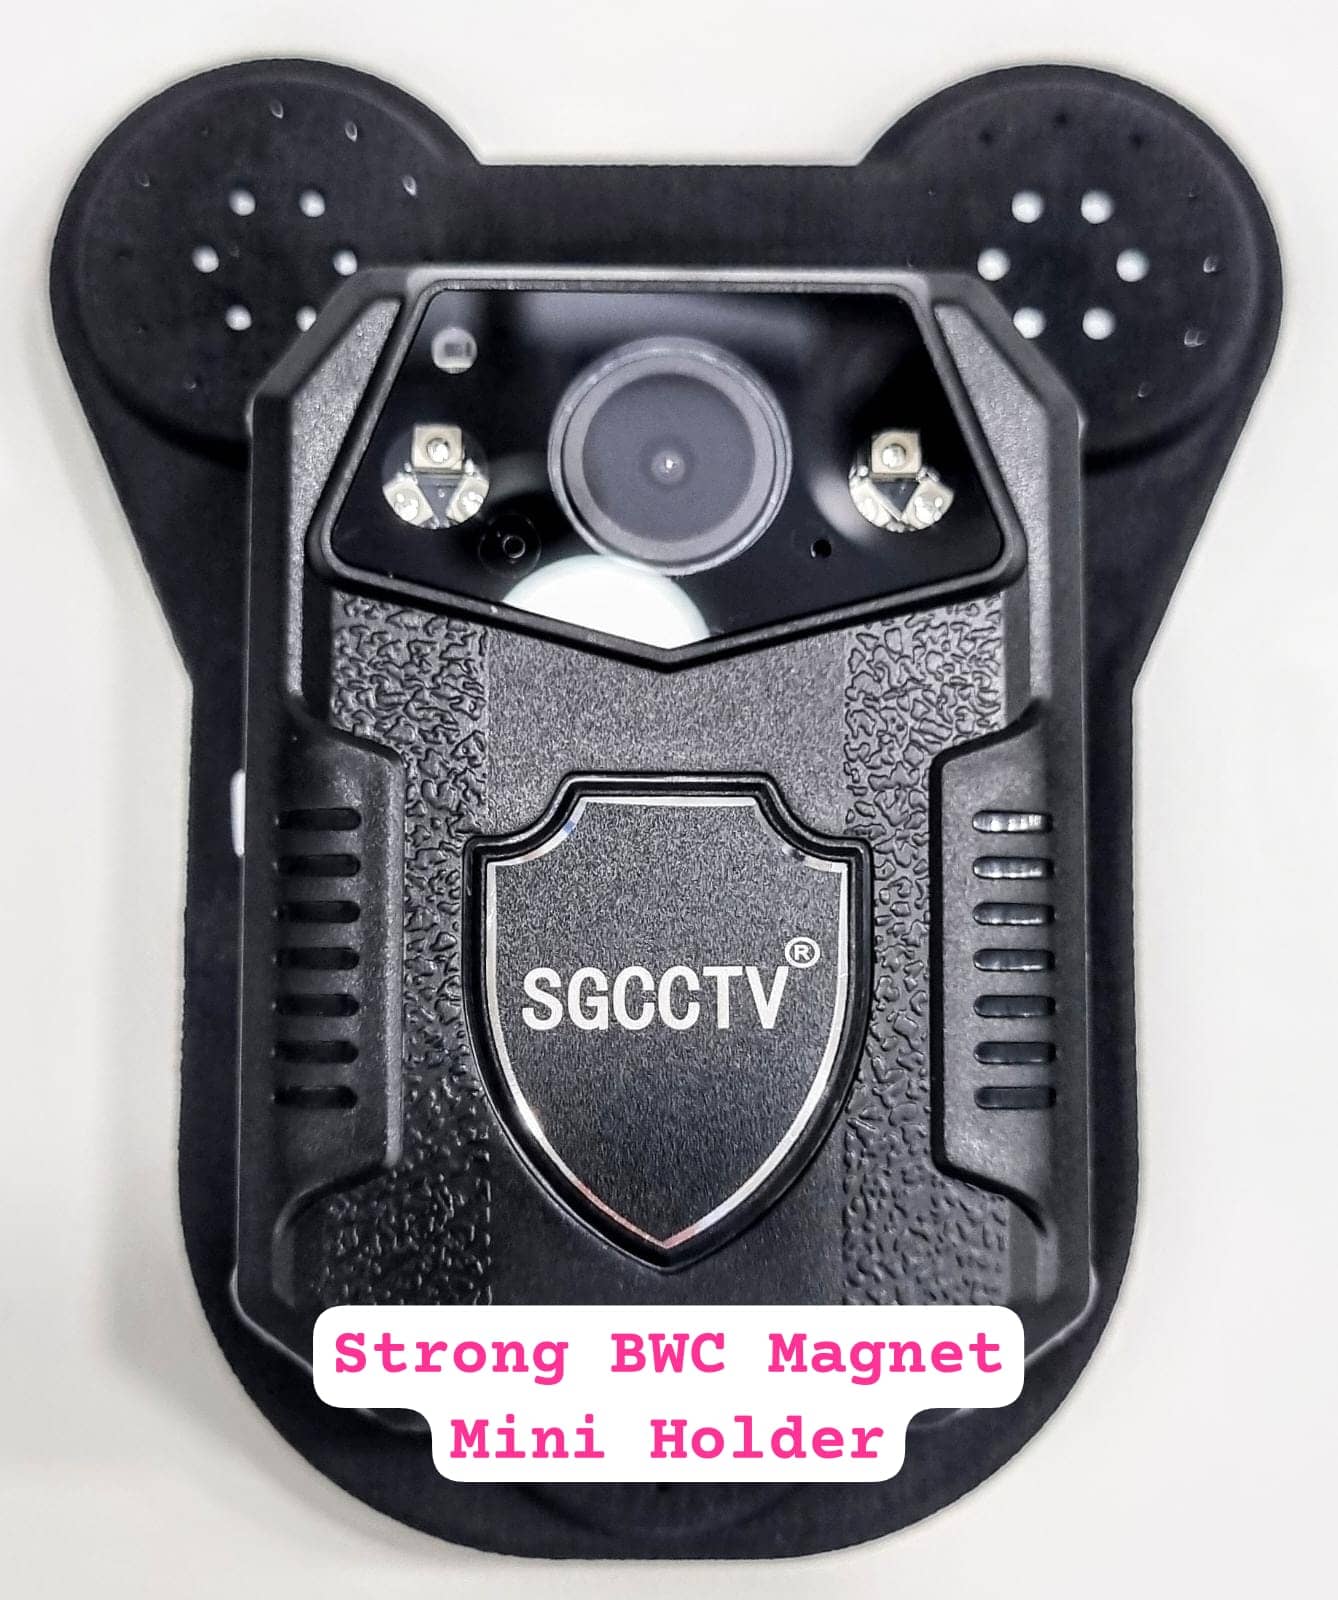 Body Camera Magnetic Mount, Universal Magnetic Mount Holder, for Universal All Brand Wearable Law Body Cams